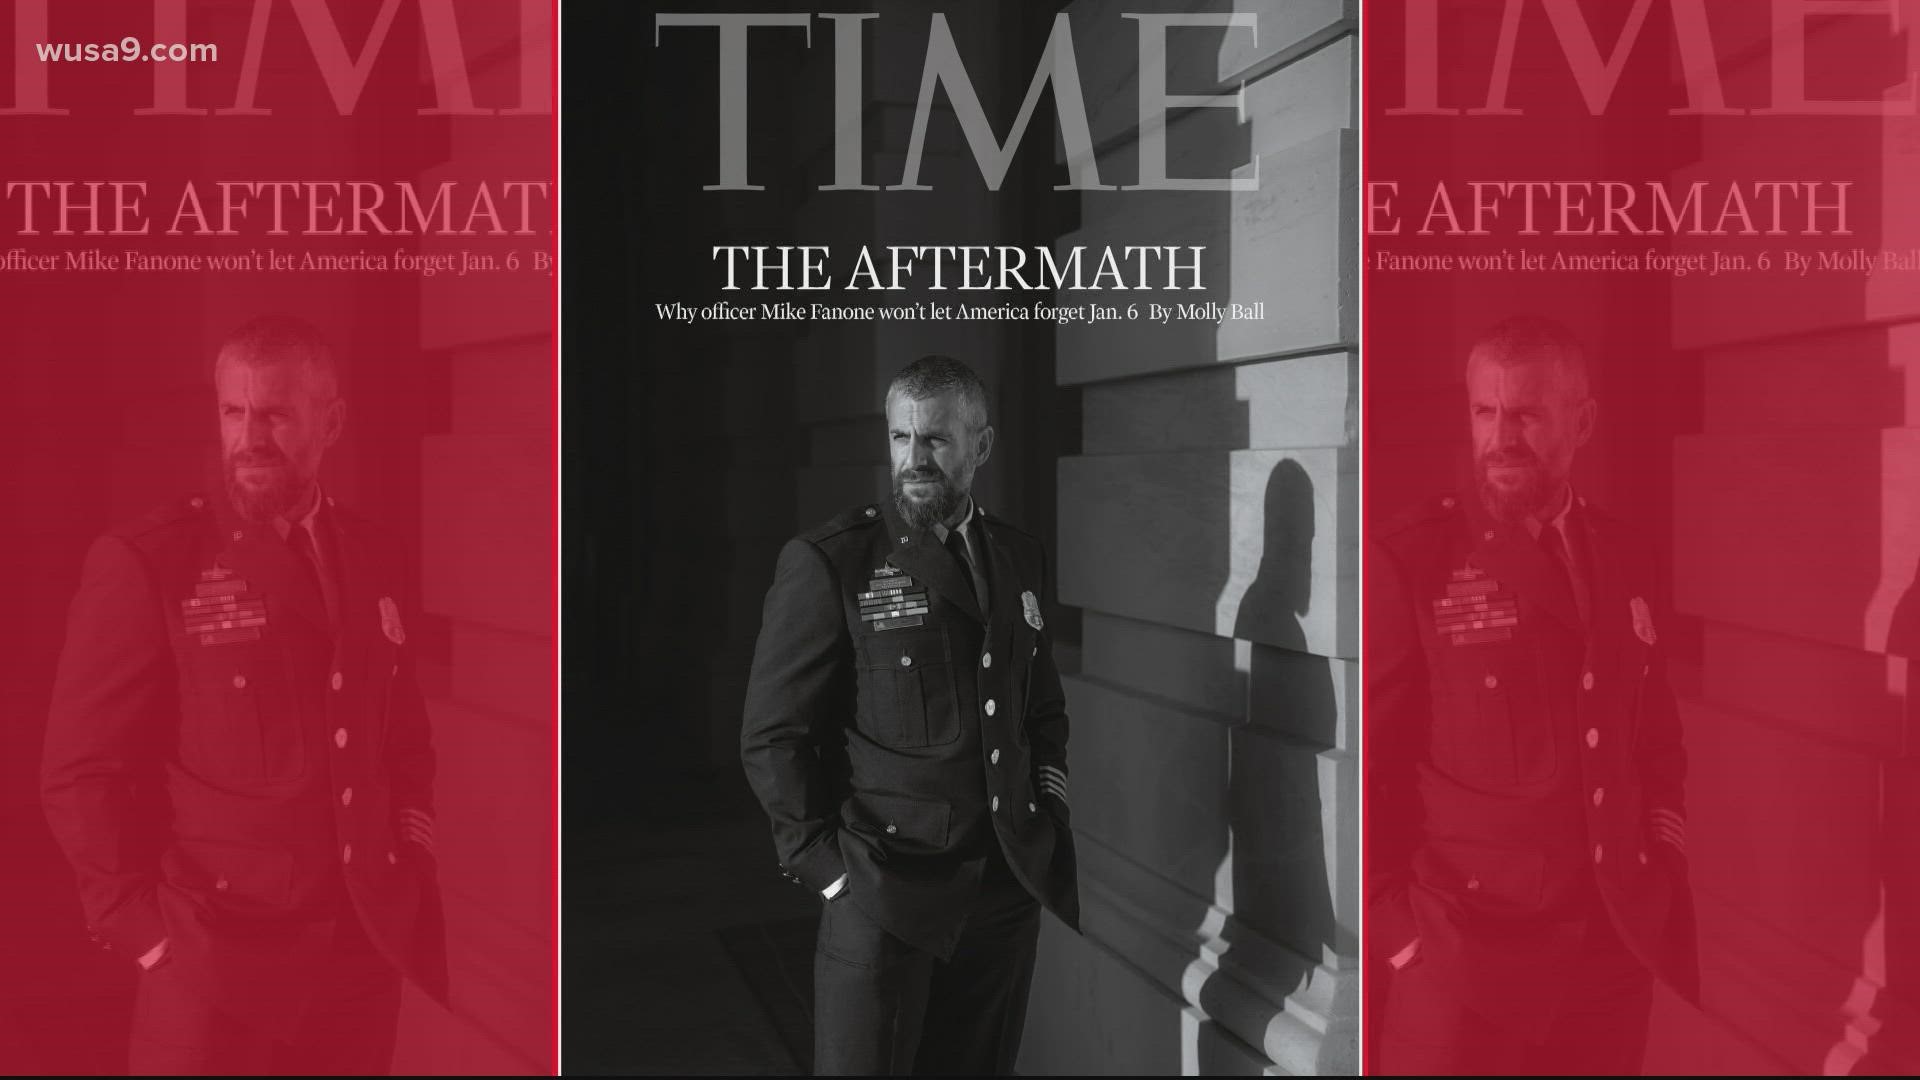 DC Police Officer Michael Fanone will appear on the cover of the latest issue of TIME Magazine discussing the January 6 Capitol riot and what he's been going through